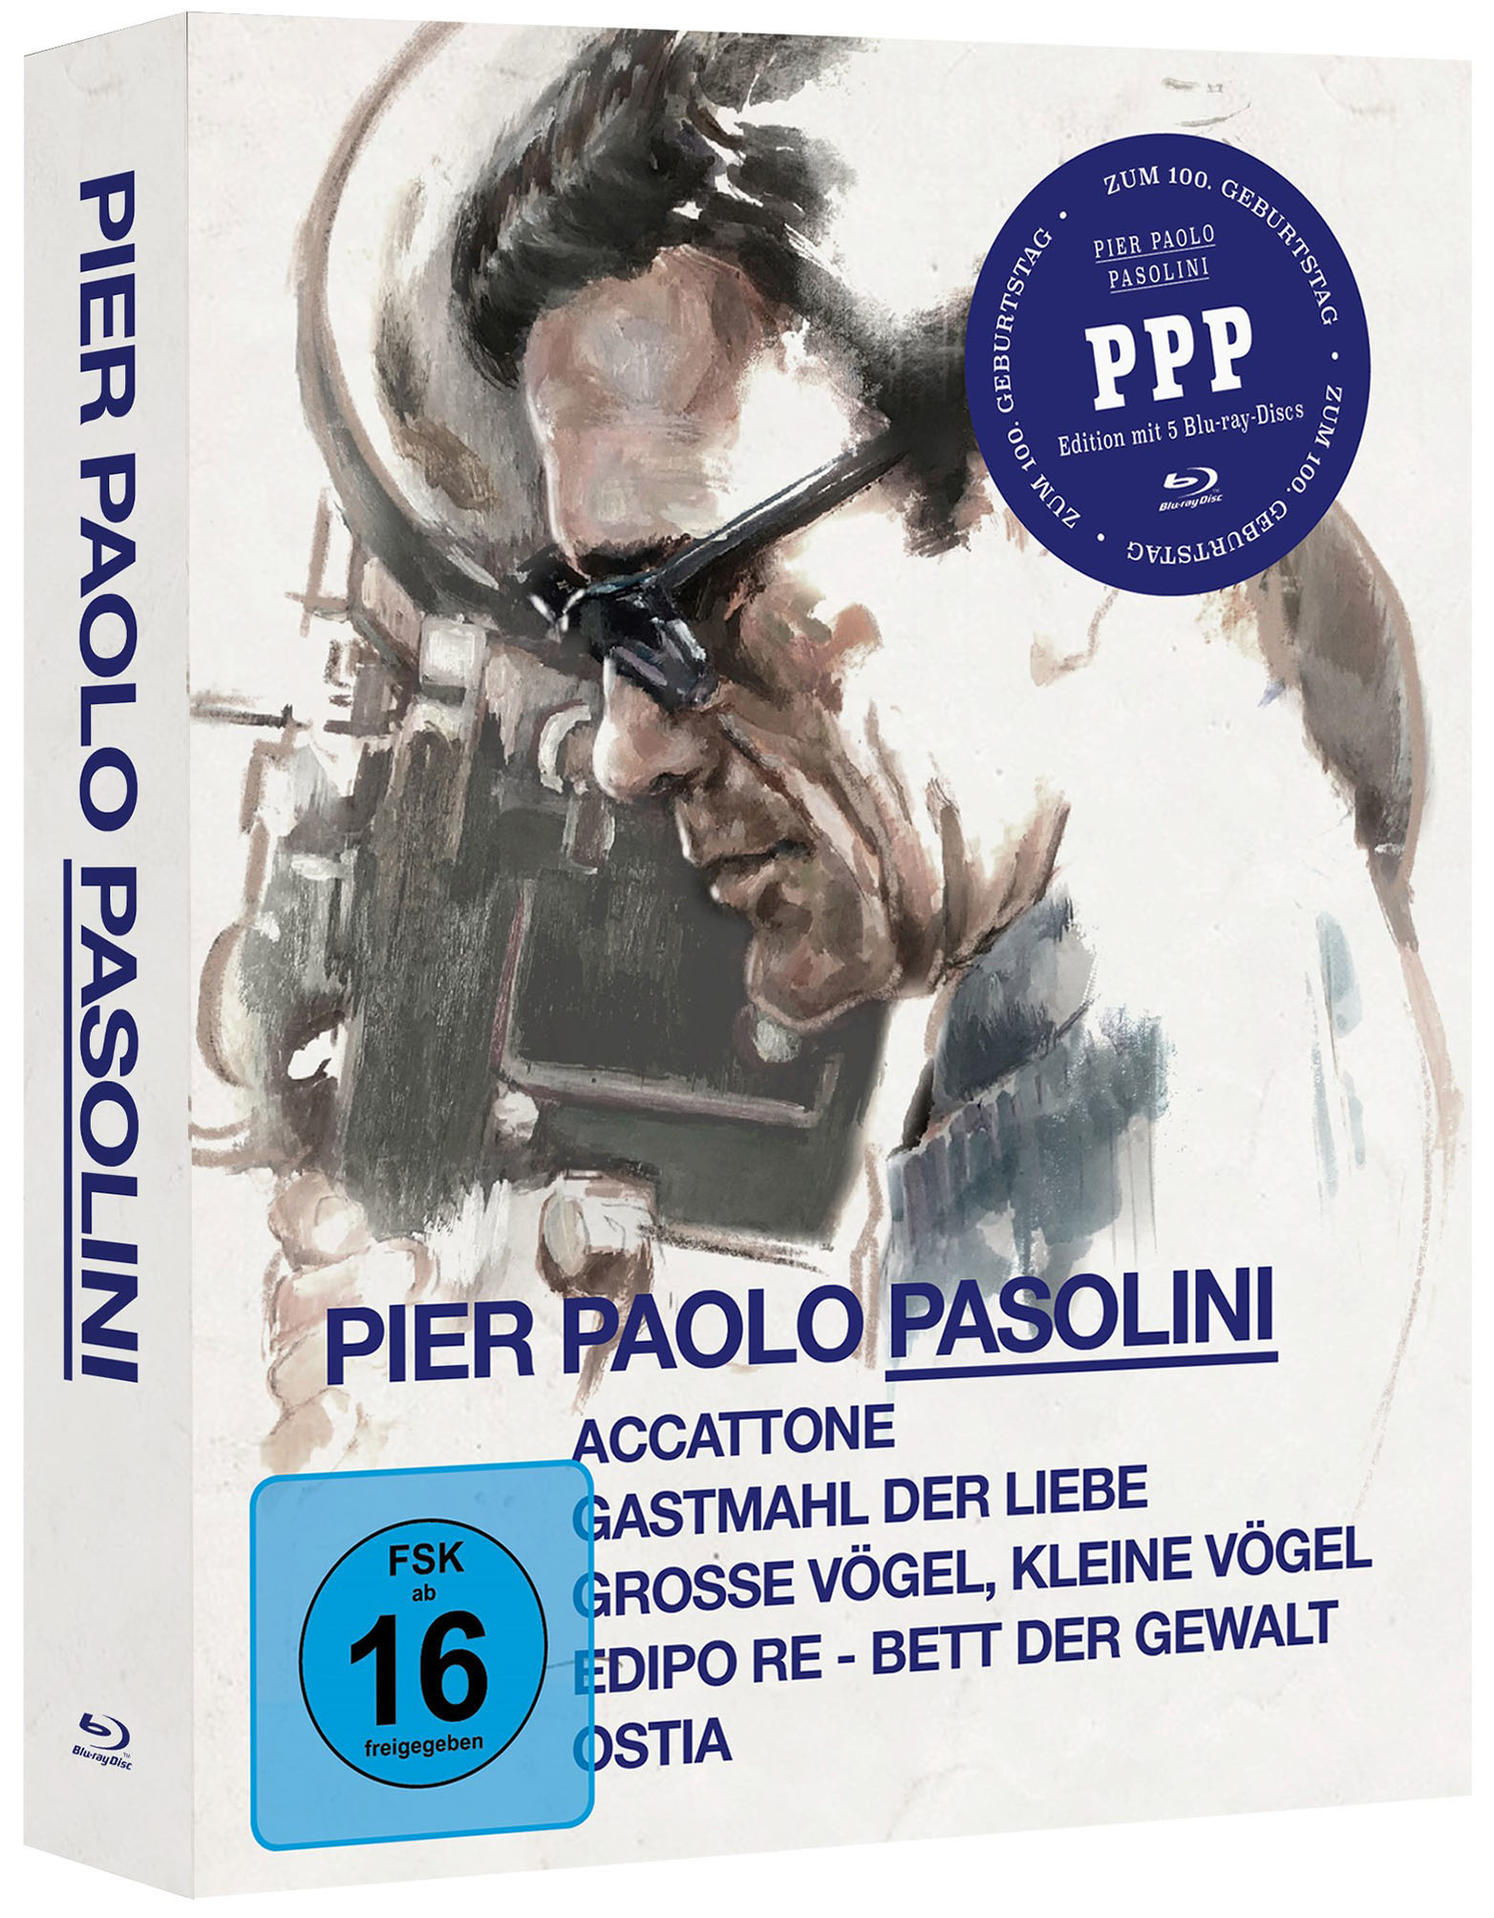 Pasolini Paolo Pier Collection Blu-ray